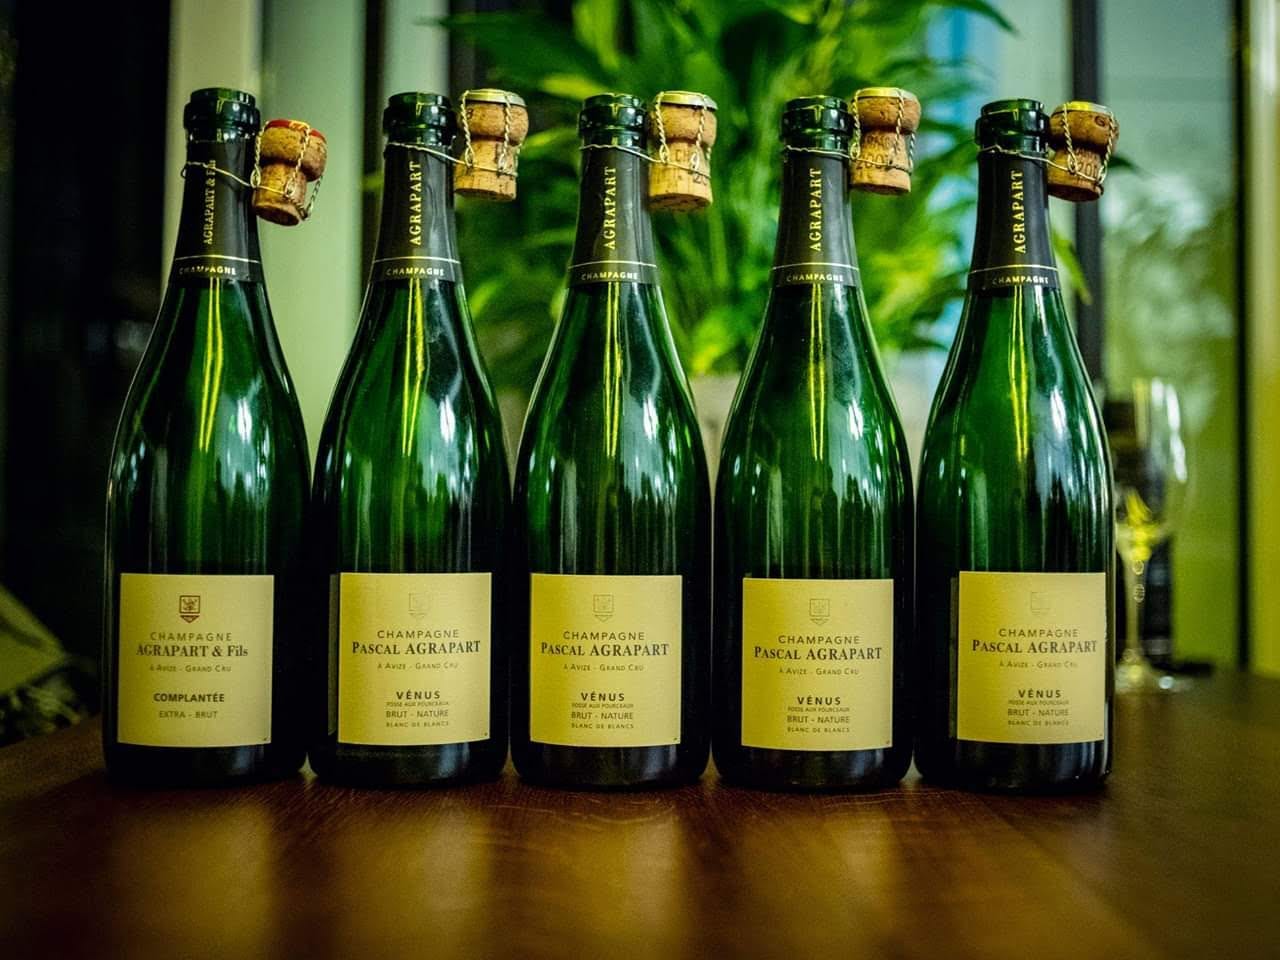 Pascal Agrapart and his champagnes | by Stas Medvedev | Medium